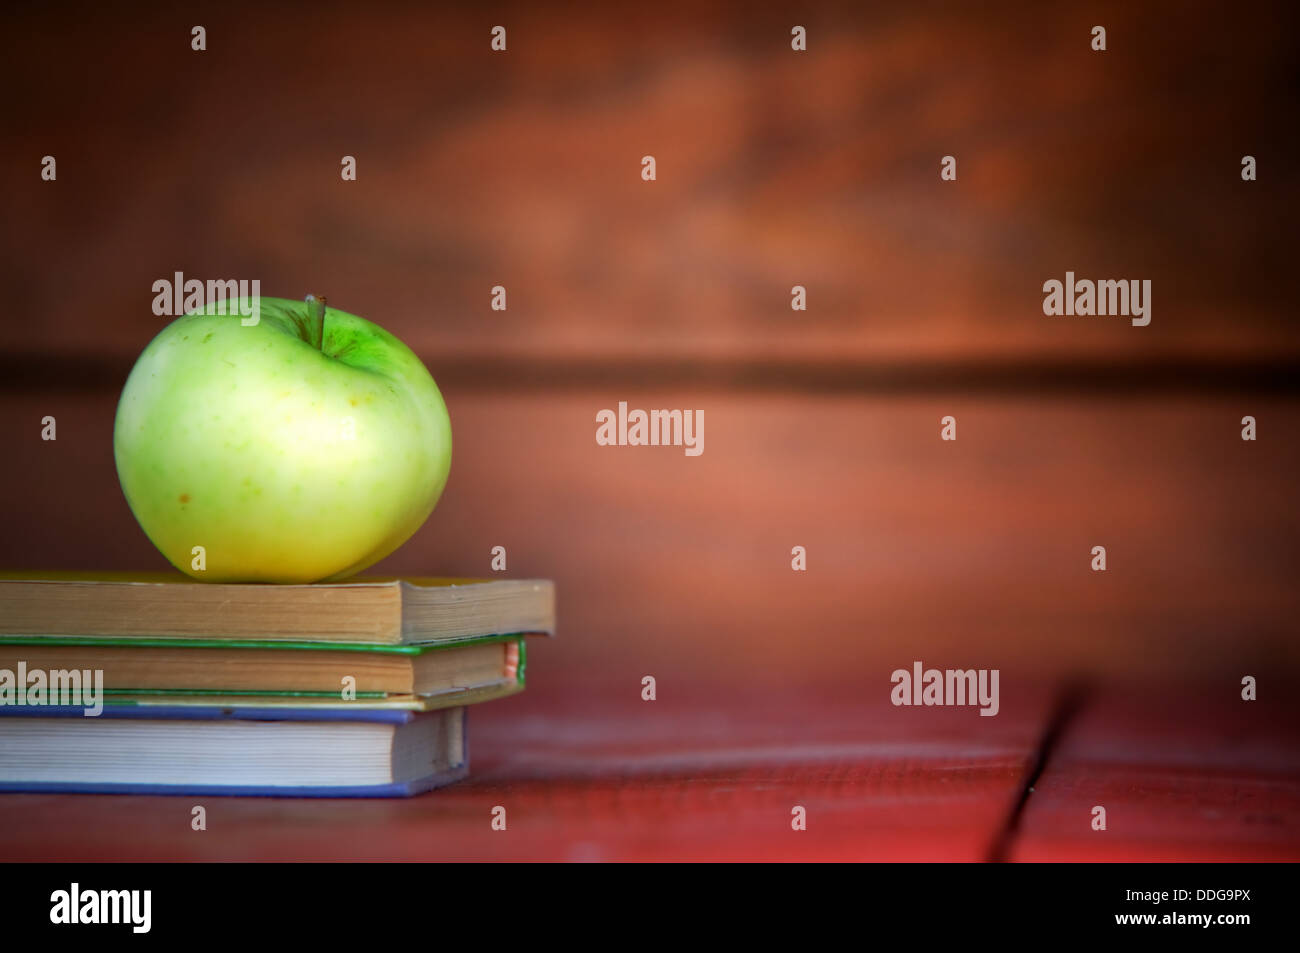 Concept education - Apple for the teacher on pile of books. Learning, back to school concepts. Stock Photo